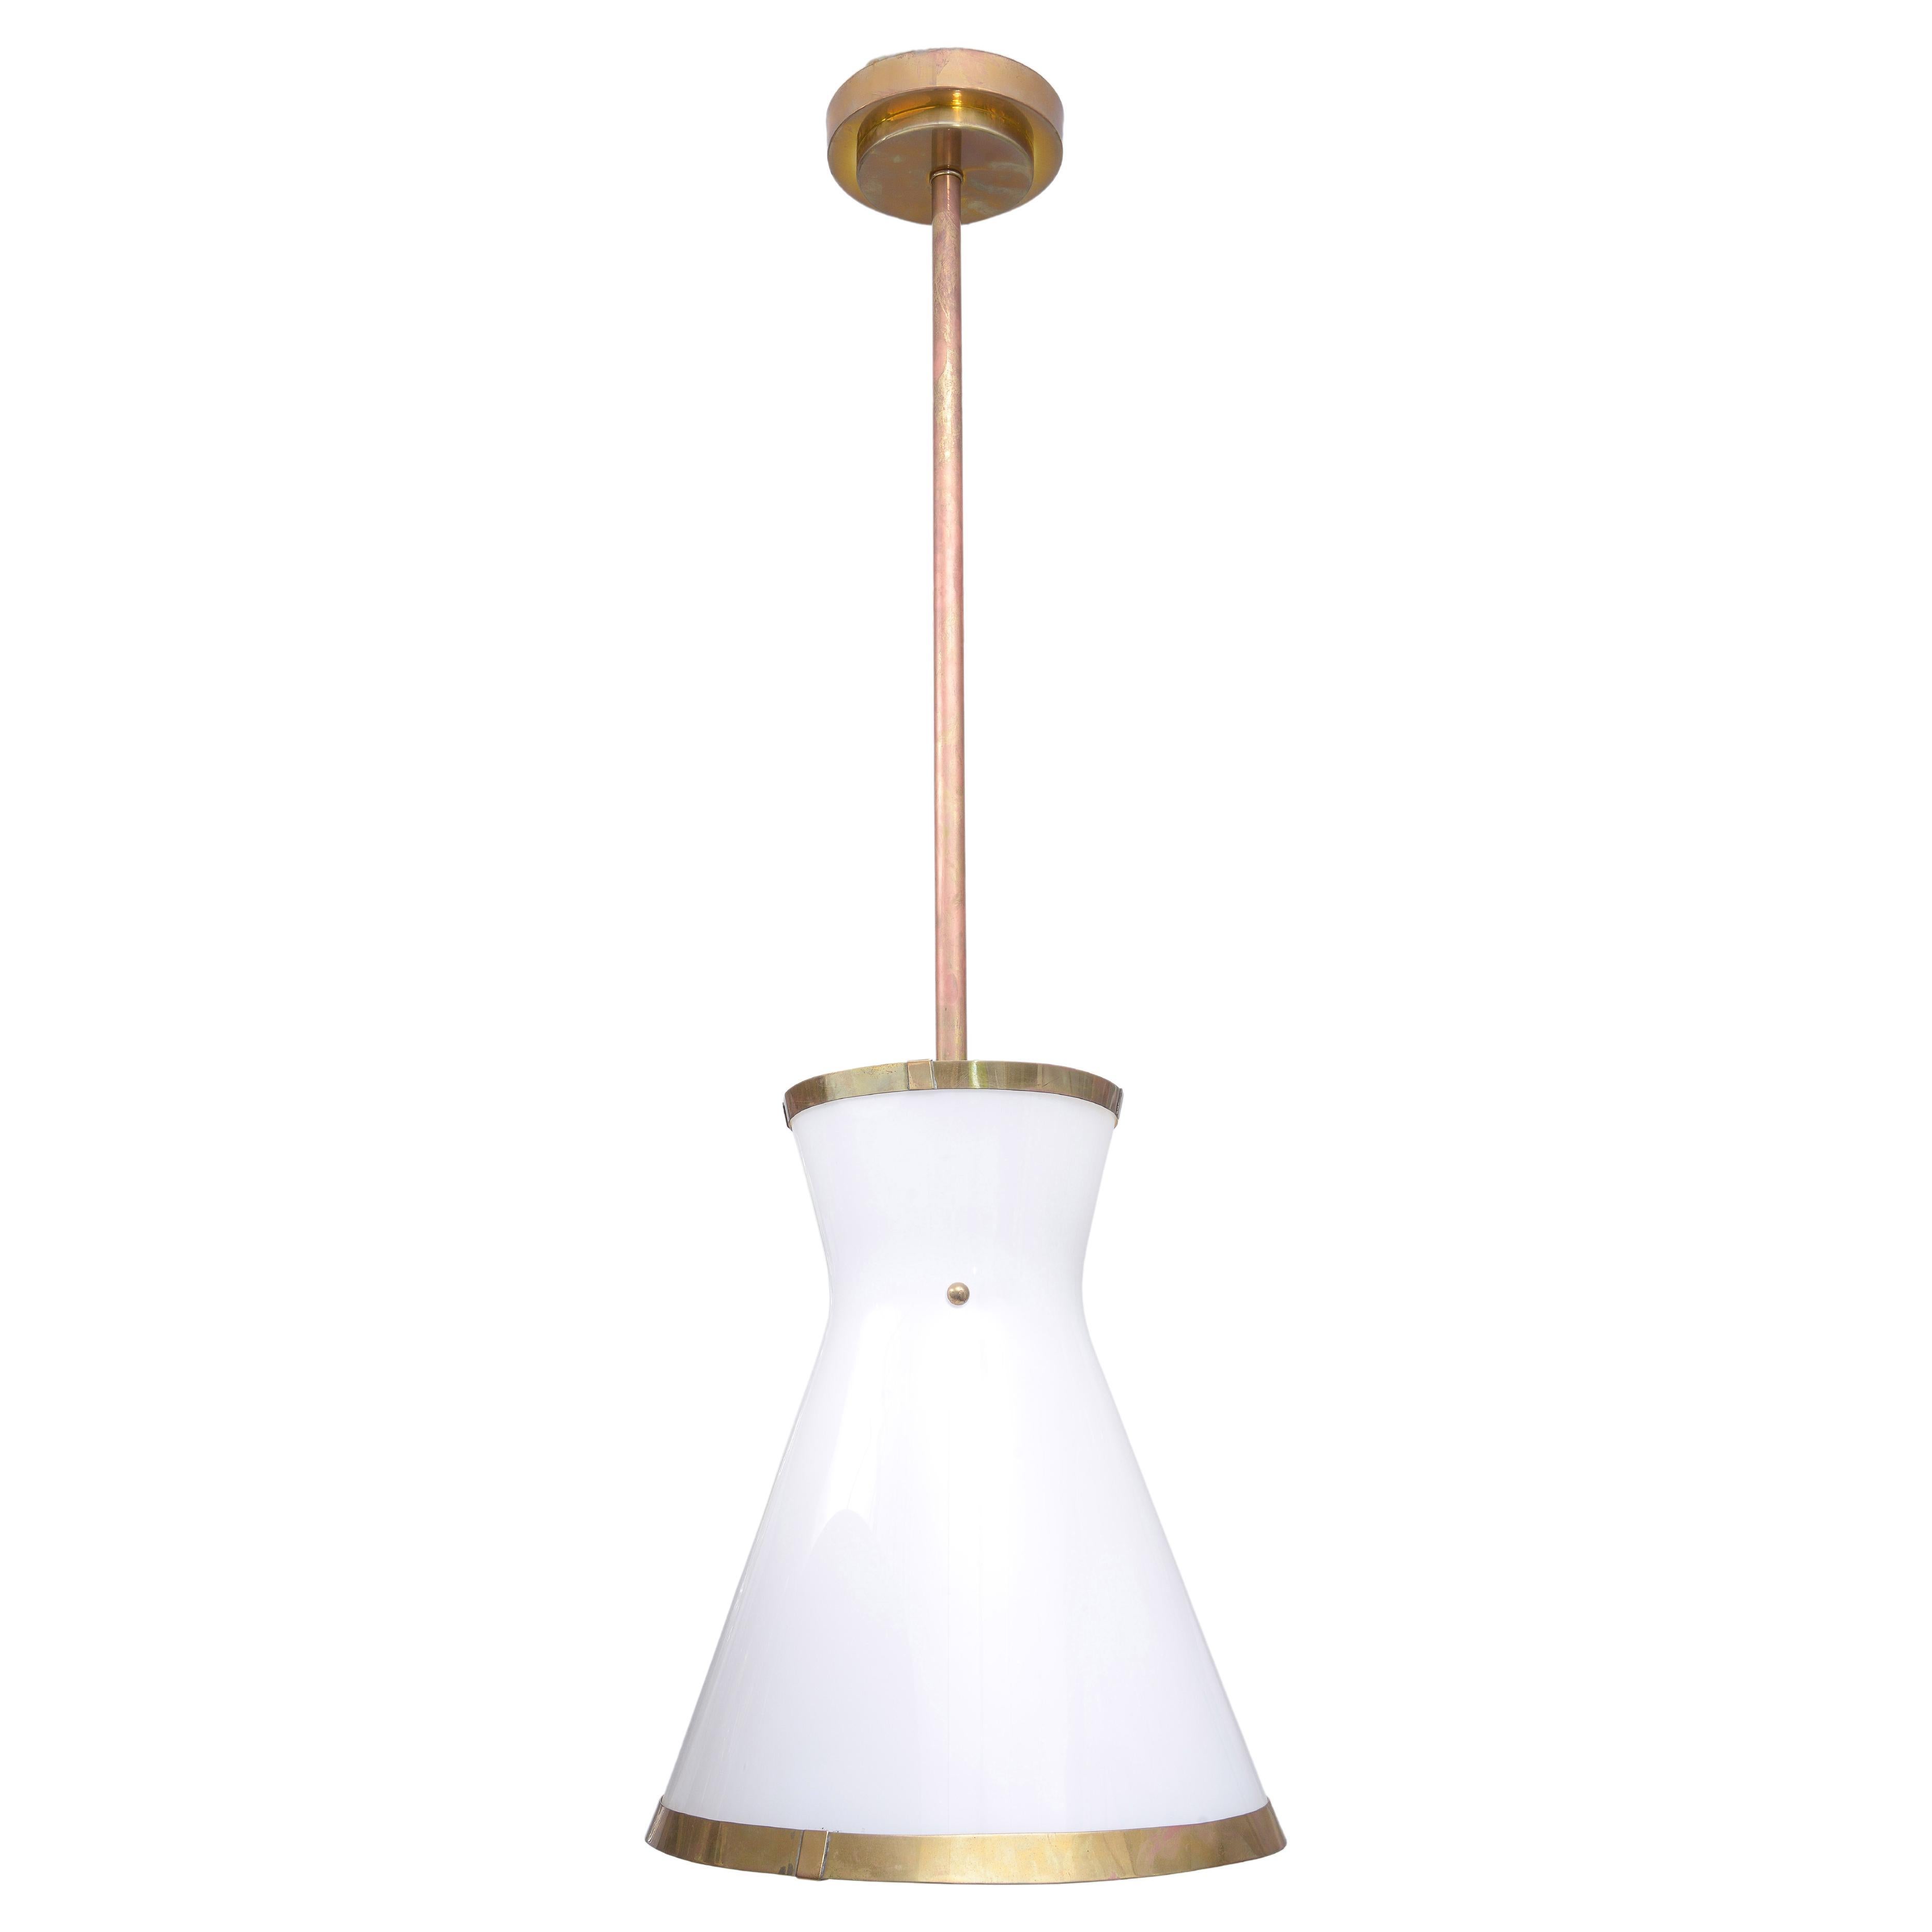 Custom Cone-Shaped Glass and Brass Fixture